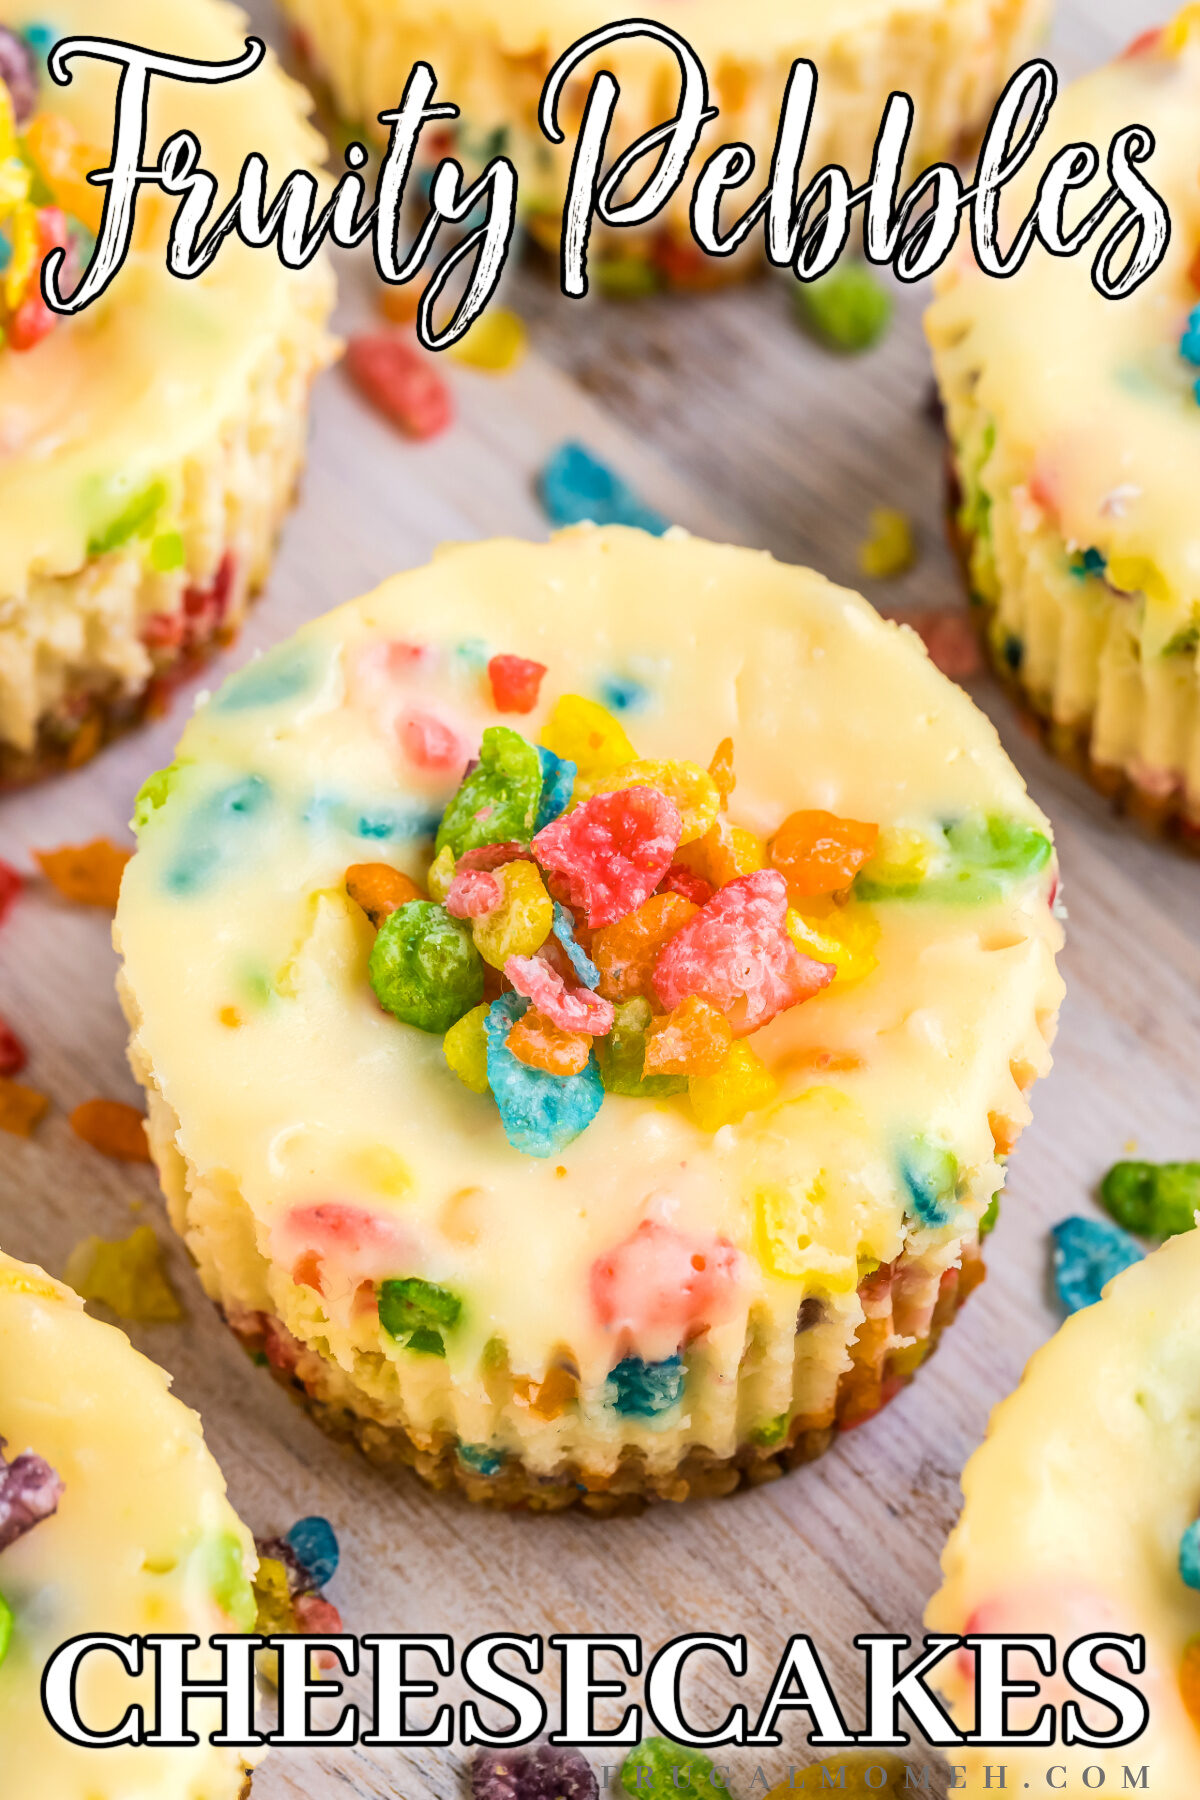 Love Fruity Pebbles cereal? Love cheesecake? Then you'll love this mini fruity pebbles cheesecake recipe! It's delicious and loads of fun!